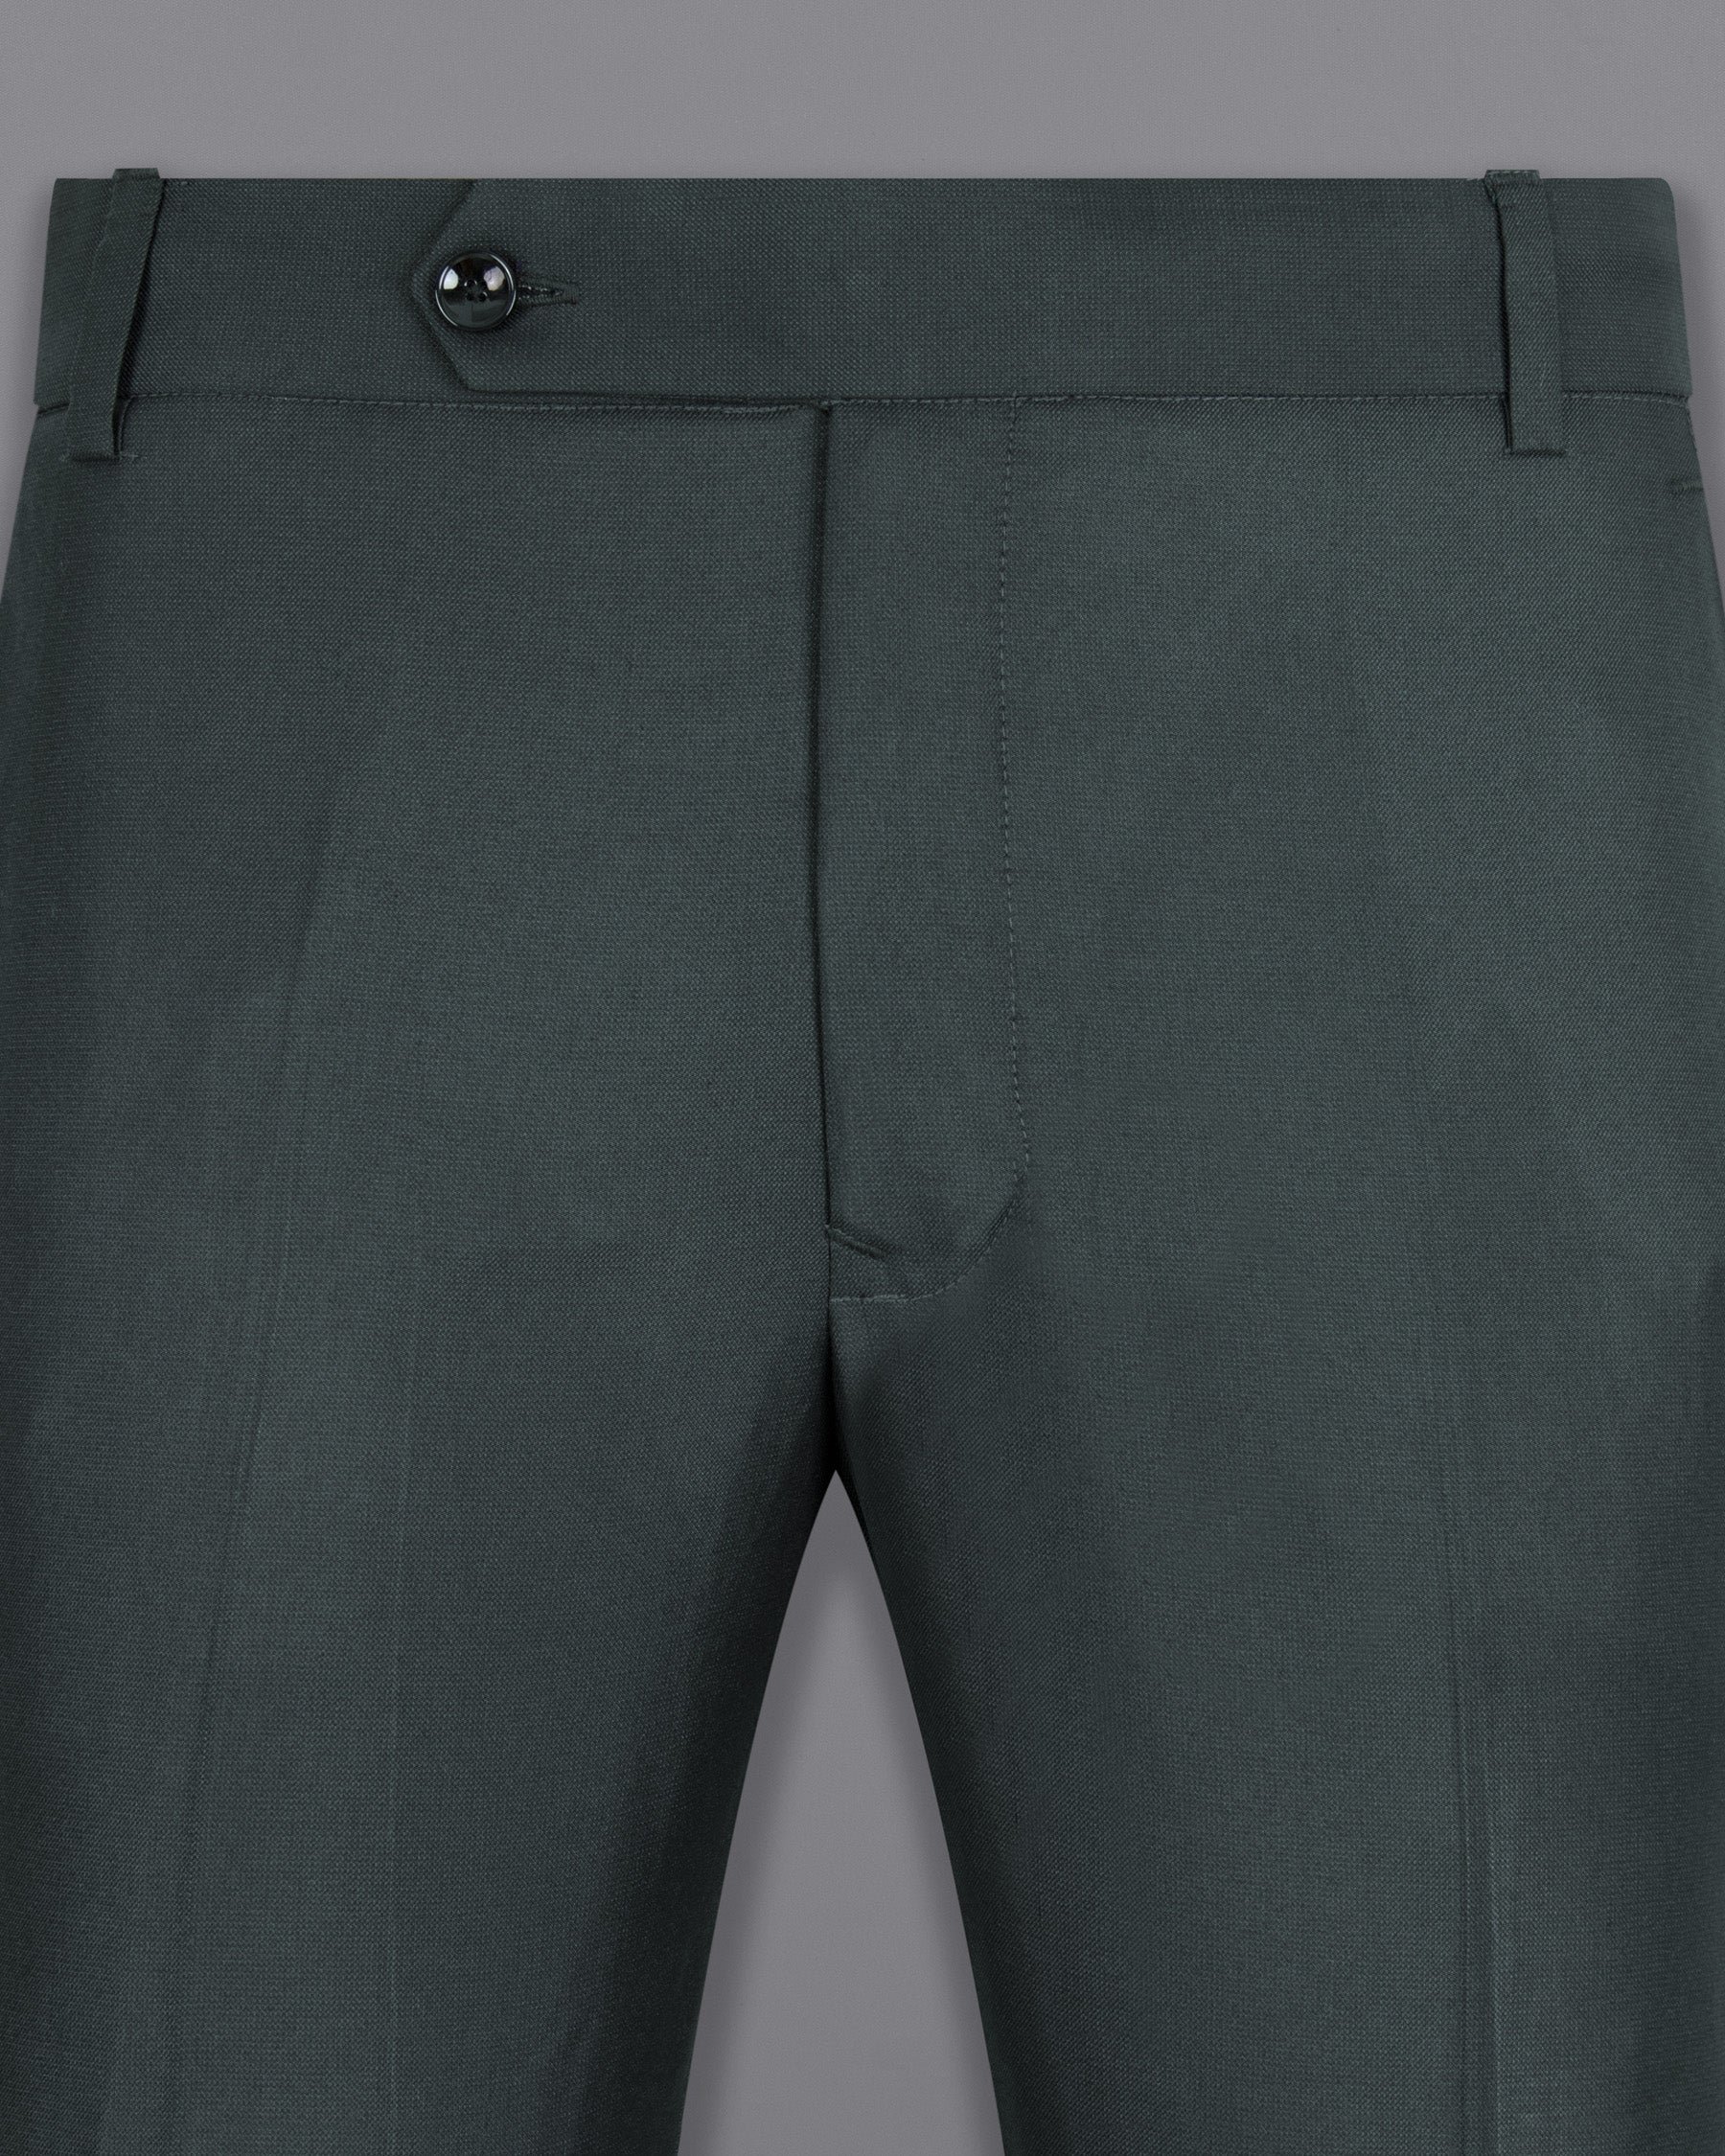 Pale Sky Grey houndstooth Wool Rich  Pant T1311-28, T1311-30, T1311-32, T1311-34, T1311-36, T1311-38, T1311-40, T1311-42, T1311-44